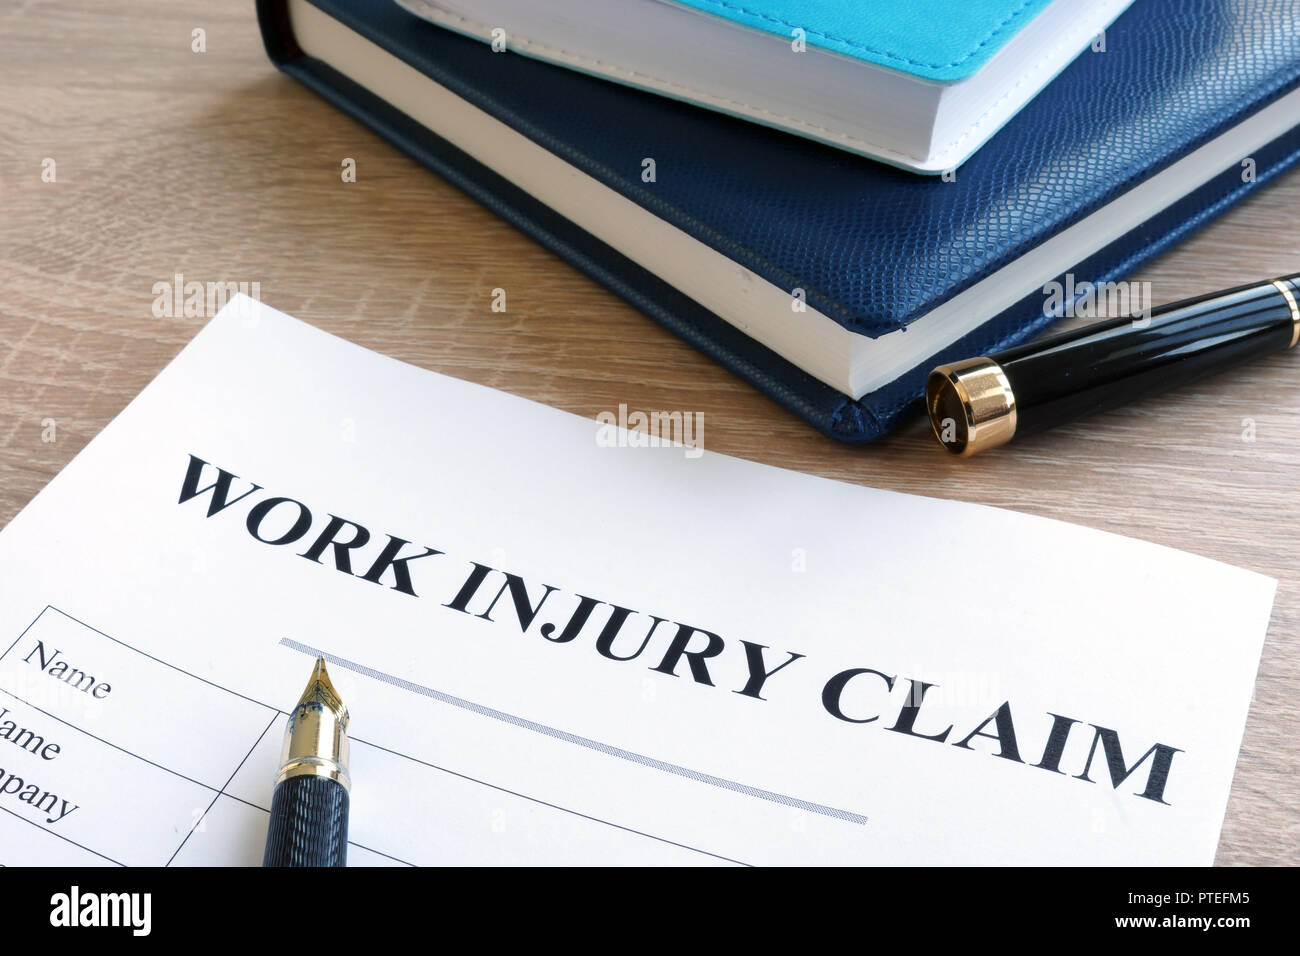 Work injury claim form and note pad. Stock Photo